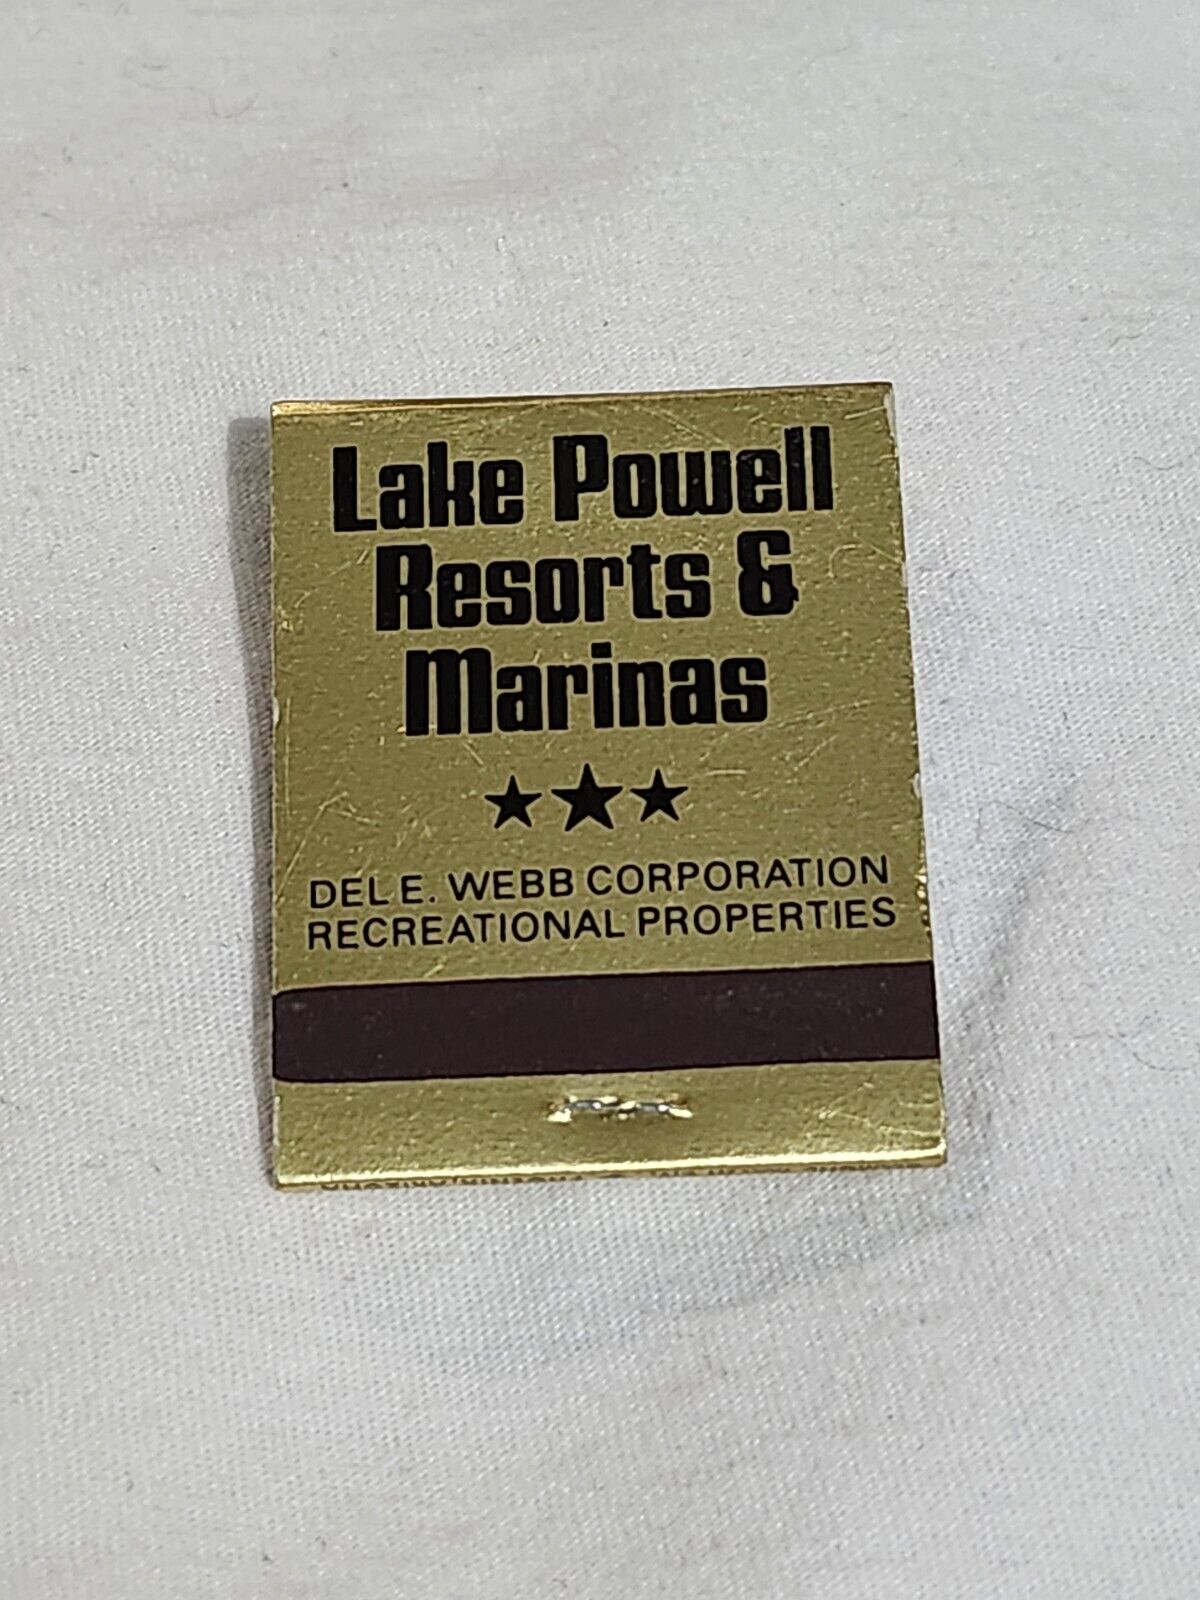 Vintage Matchbook Lake Powell Resorts and Marinas Unstruck